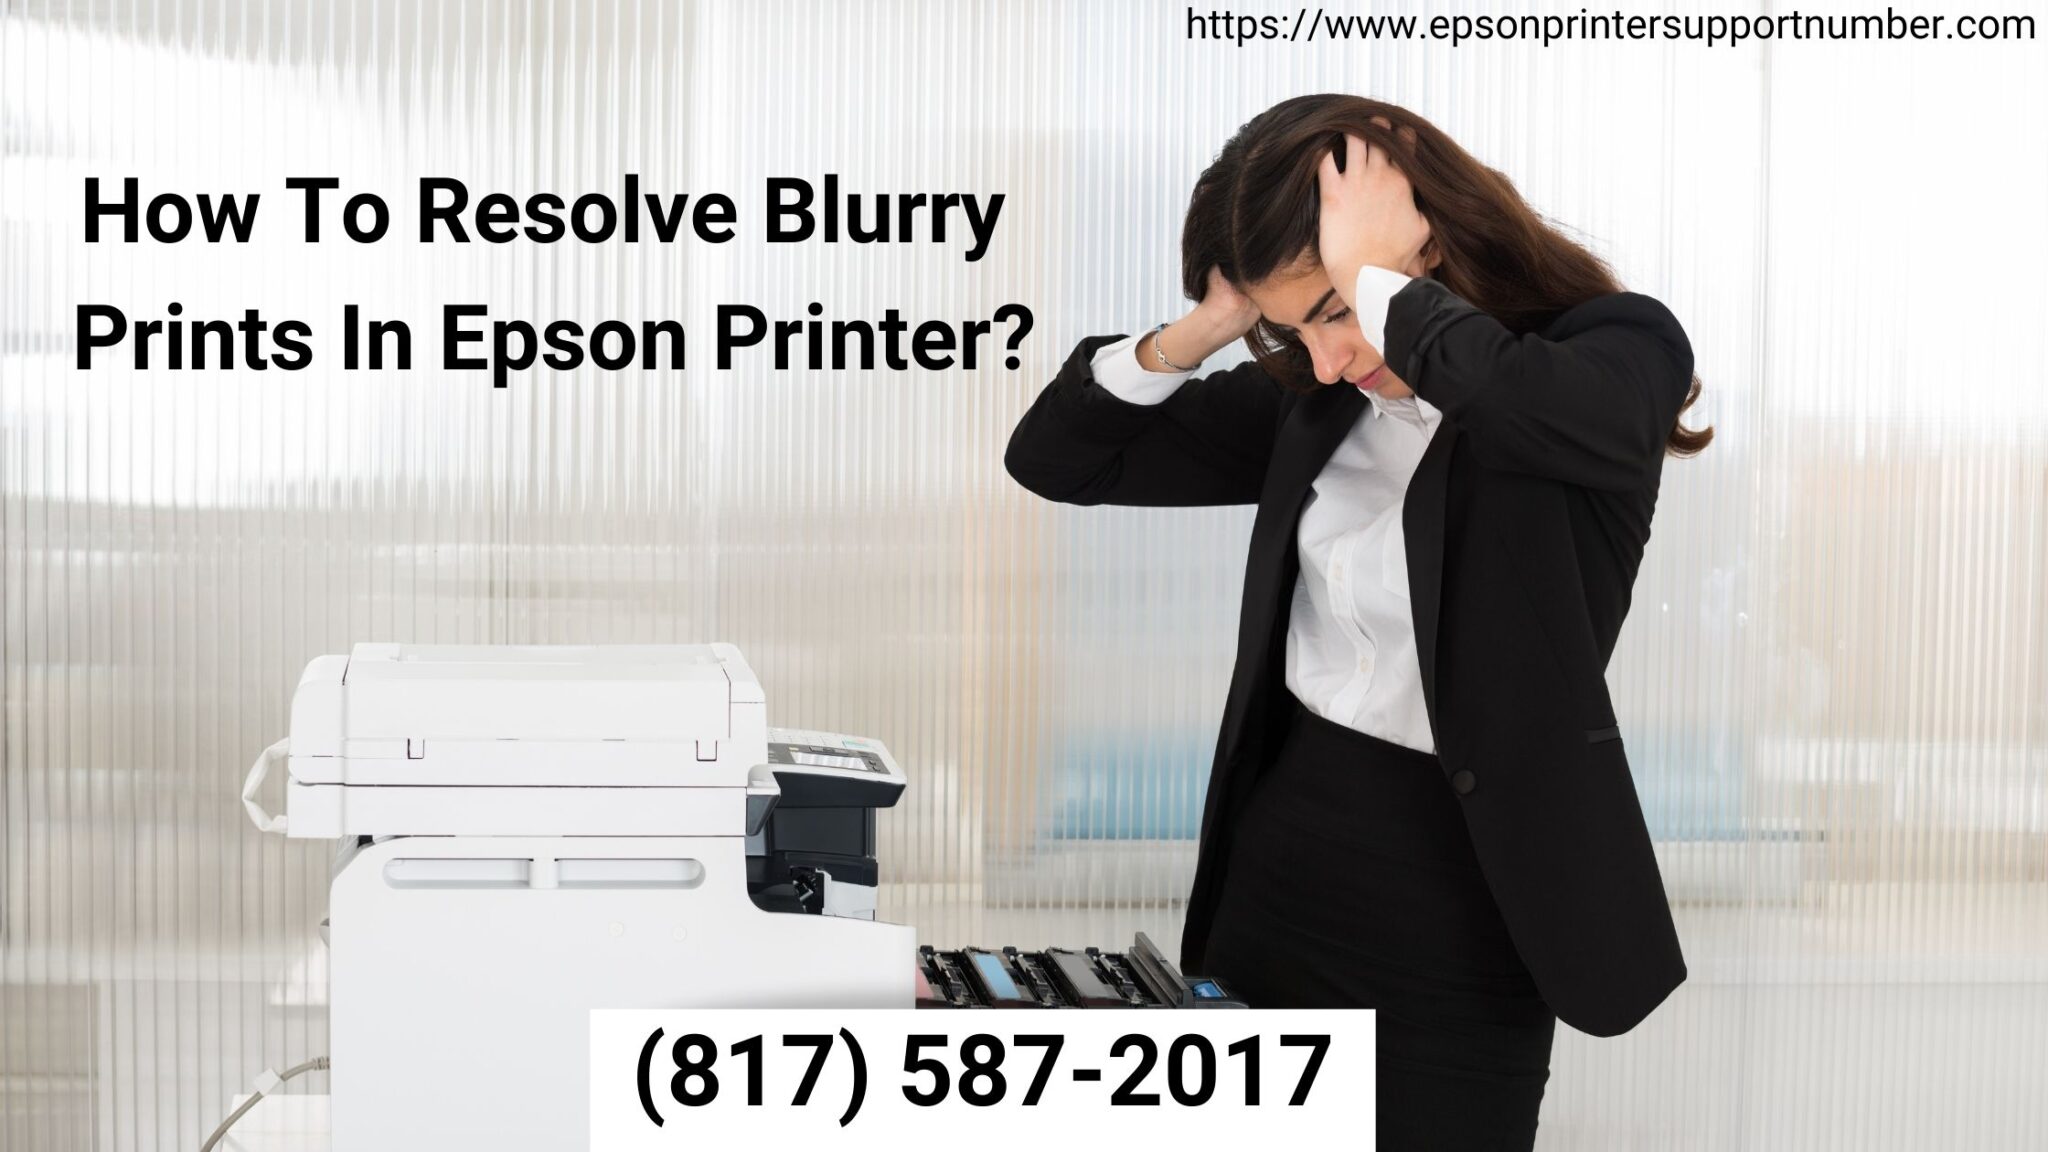 How To Resolve Blurry Prints In Epson Printer-4499d859